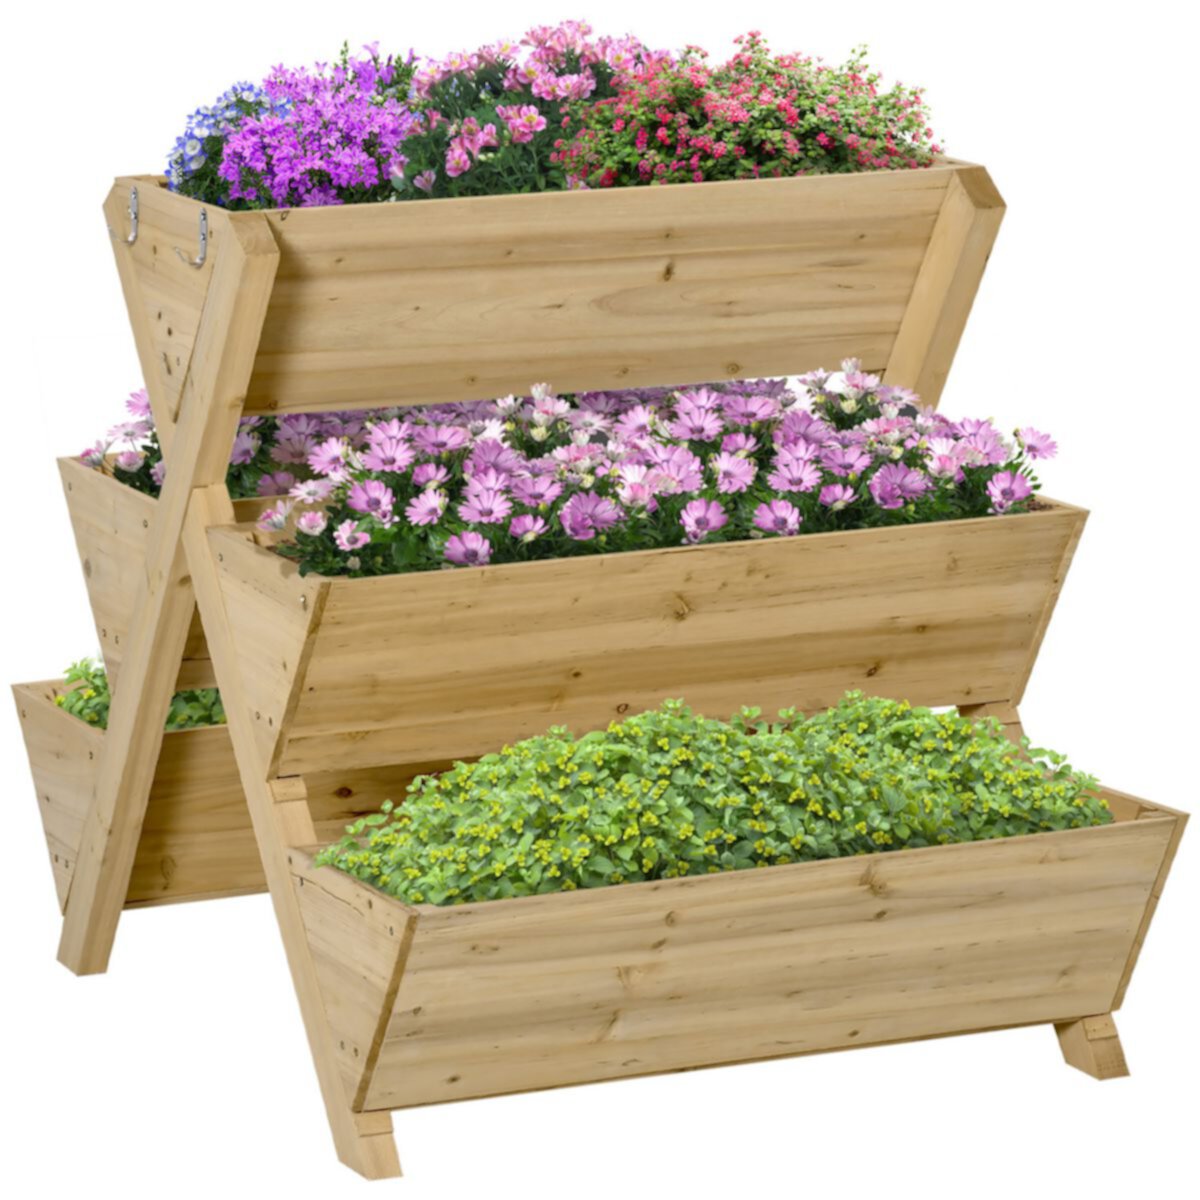 Outsunny Raised Garden Bed Freestanding Planter Stand with 5 Planting Boxes and 4 Hooks Good for Herbs Flowers or Vegetables in Patio Balcony Indoor Outdoor Outsunny